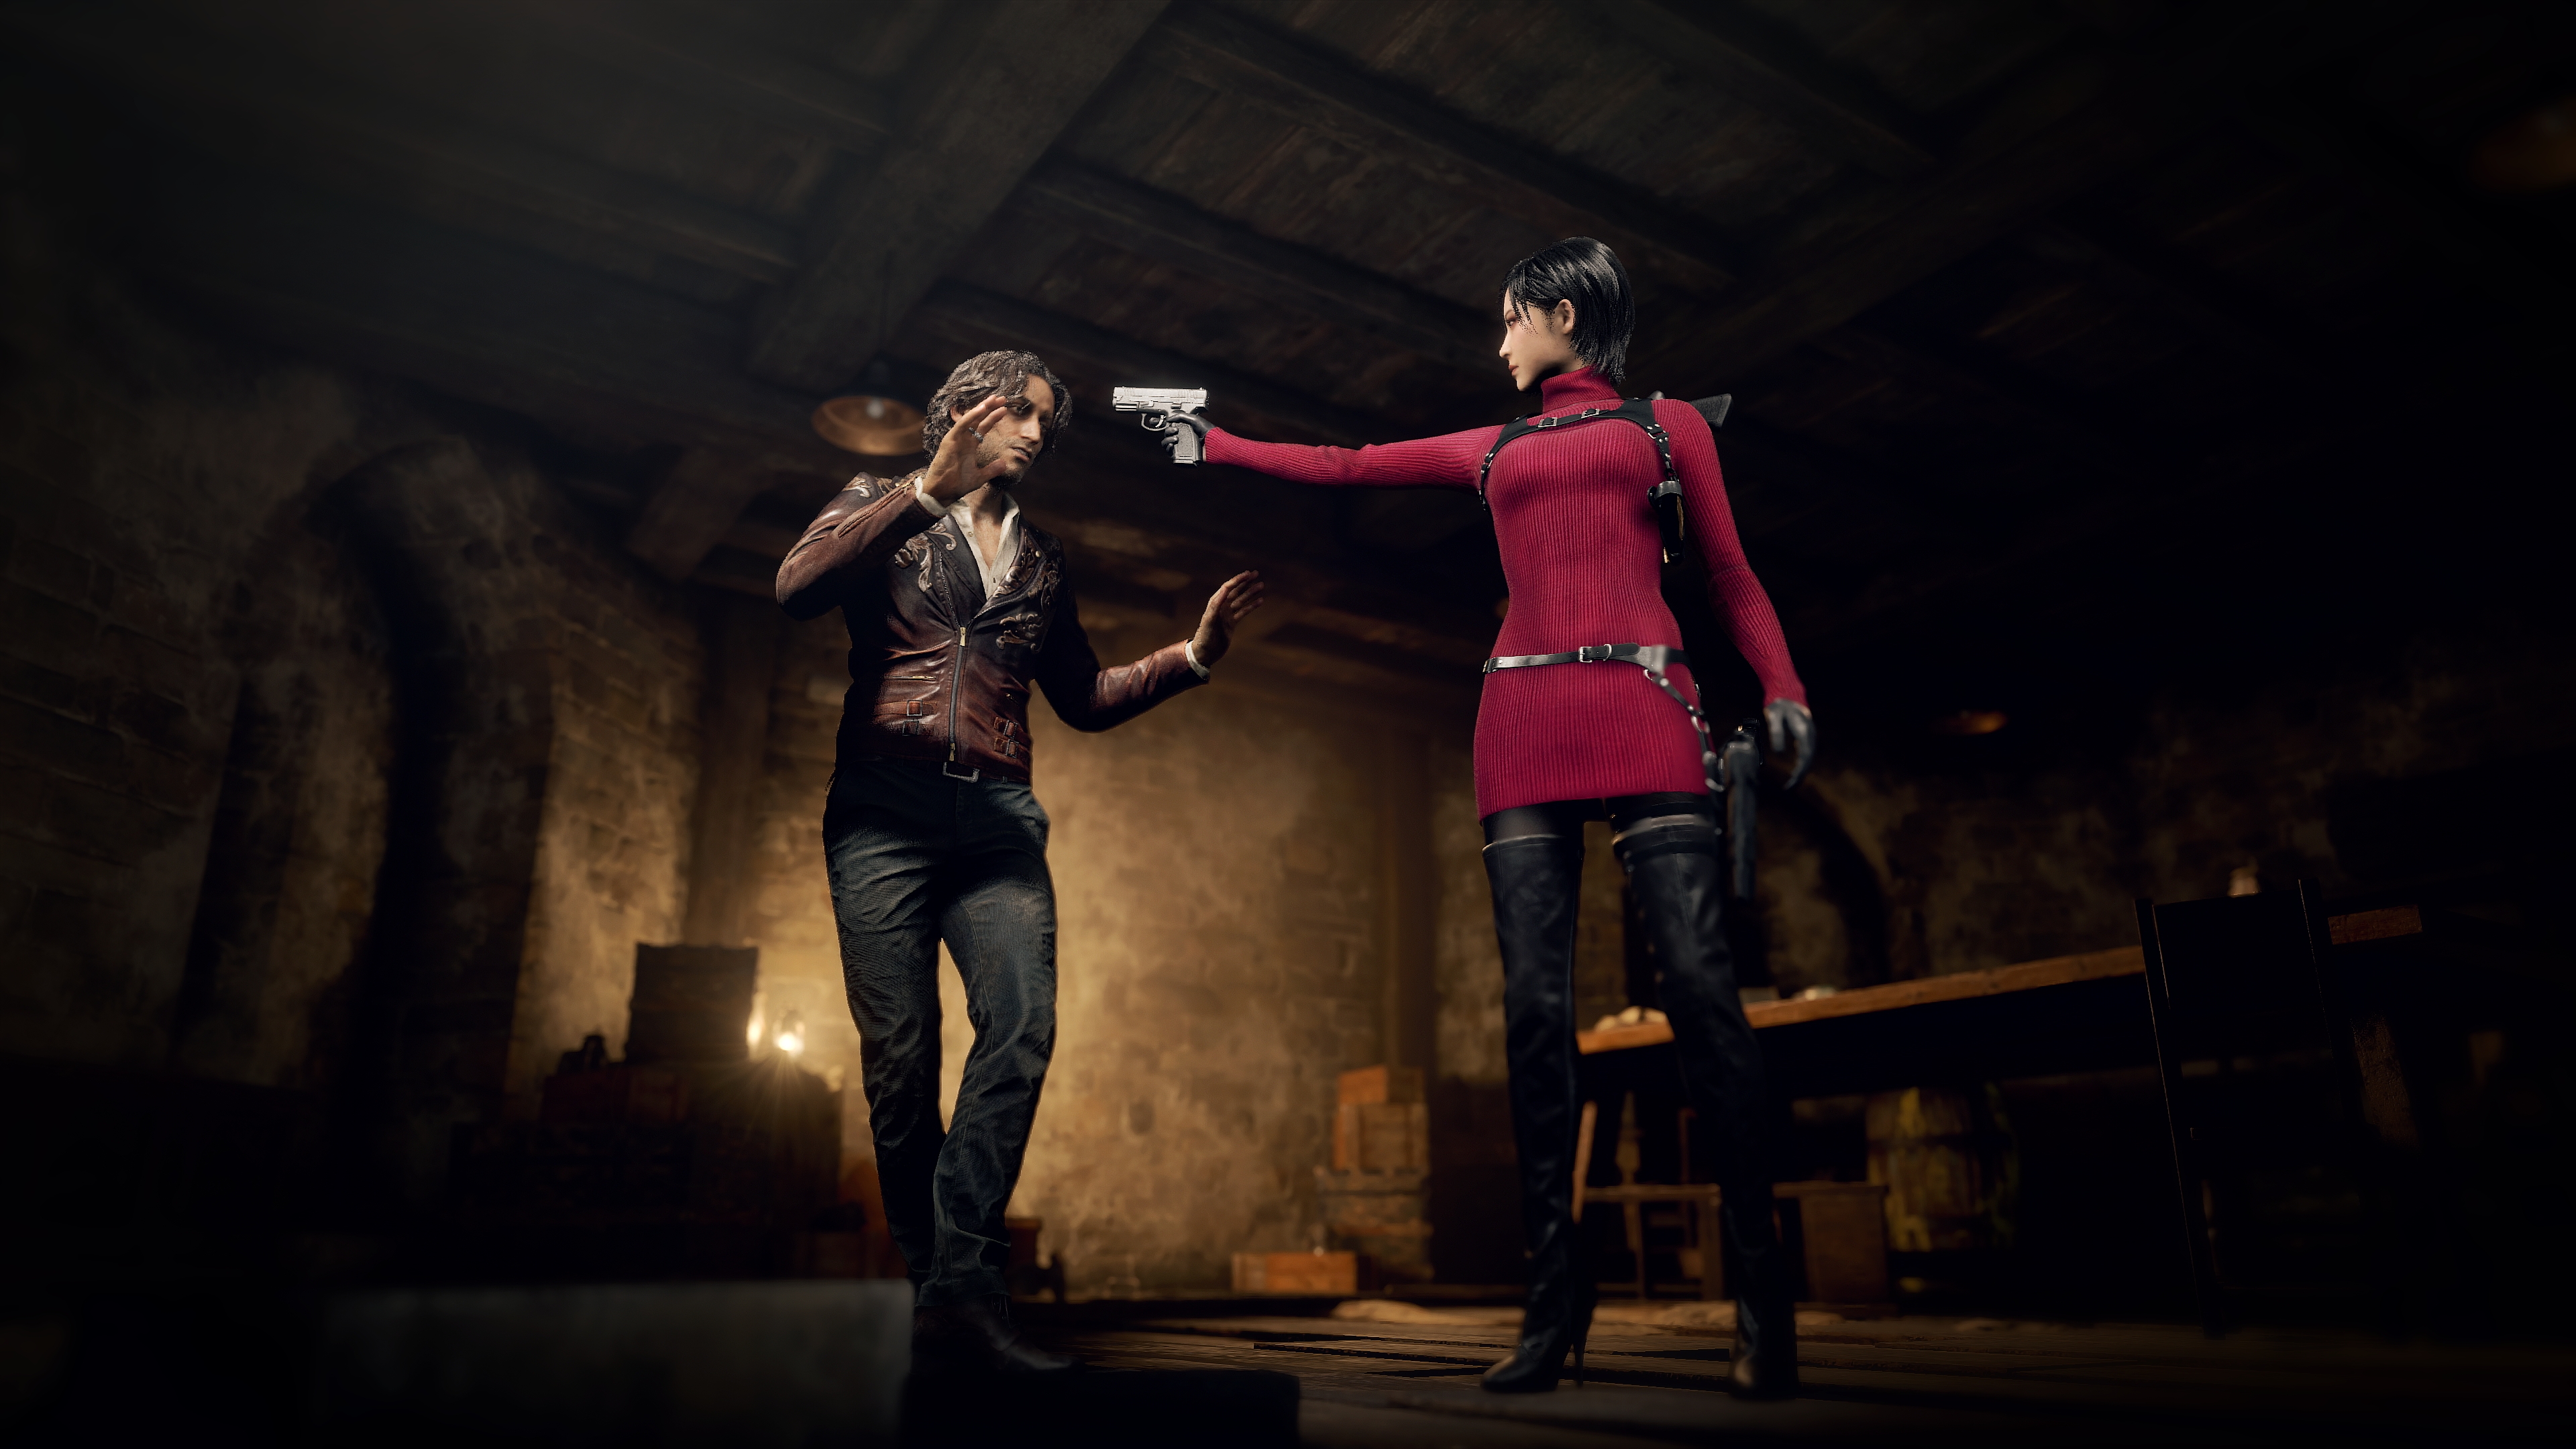 Resident Evil 4 remake free DLC release date announced - Video Games on  Sports Illustrated